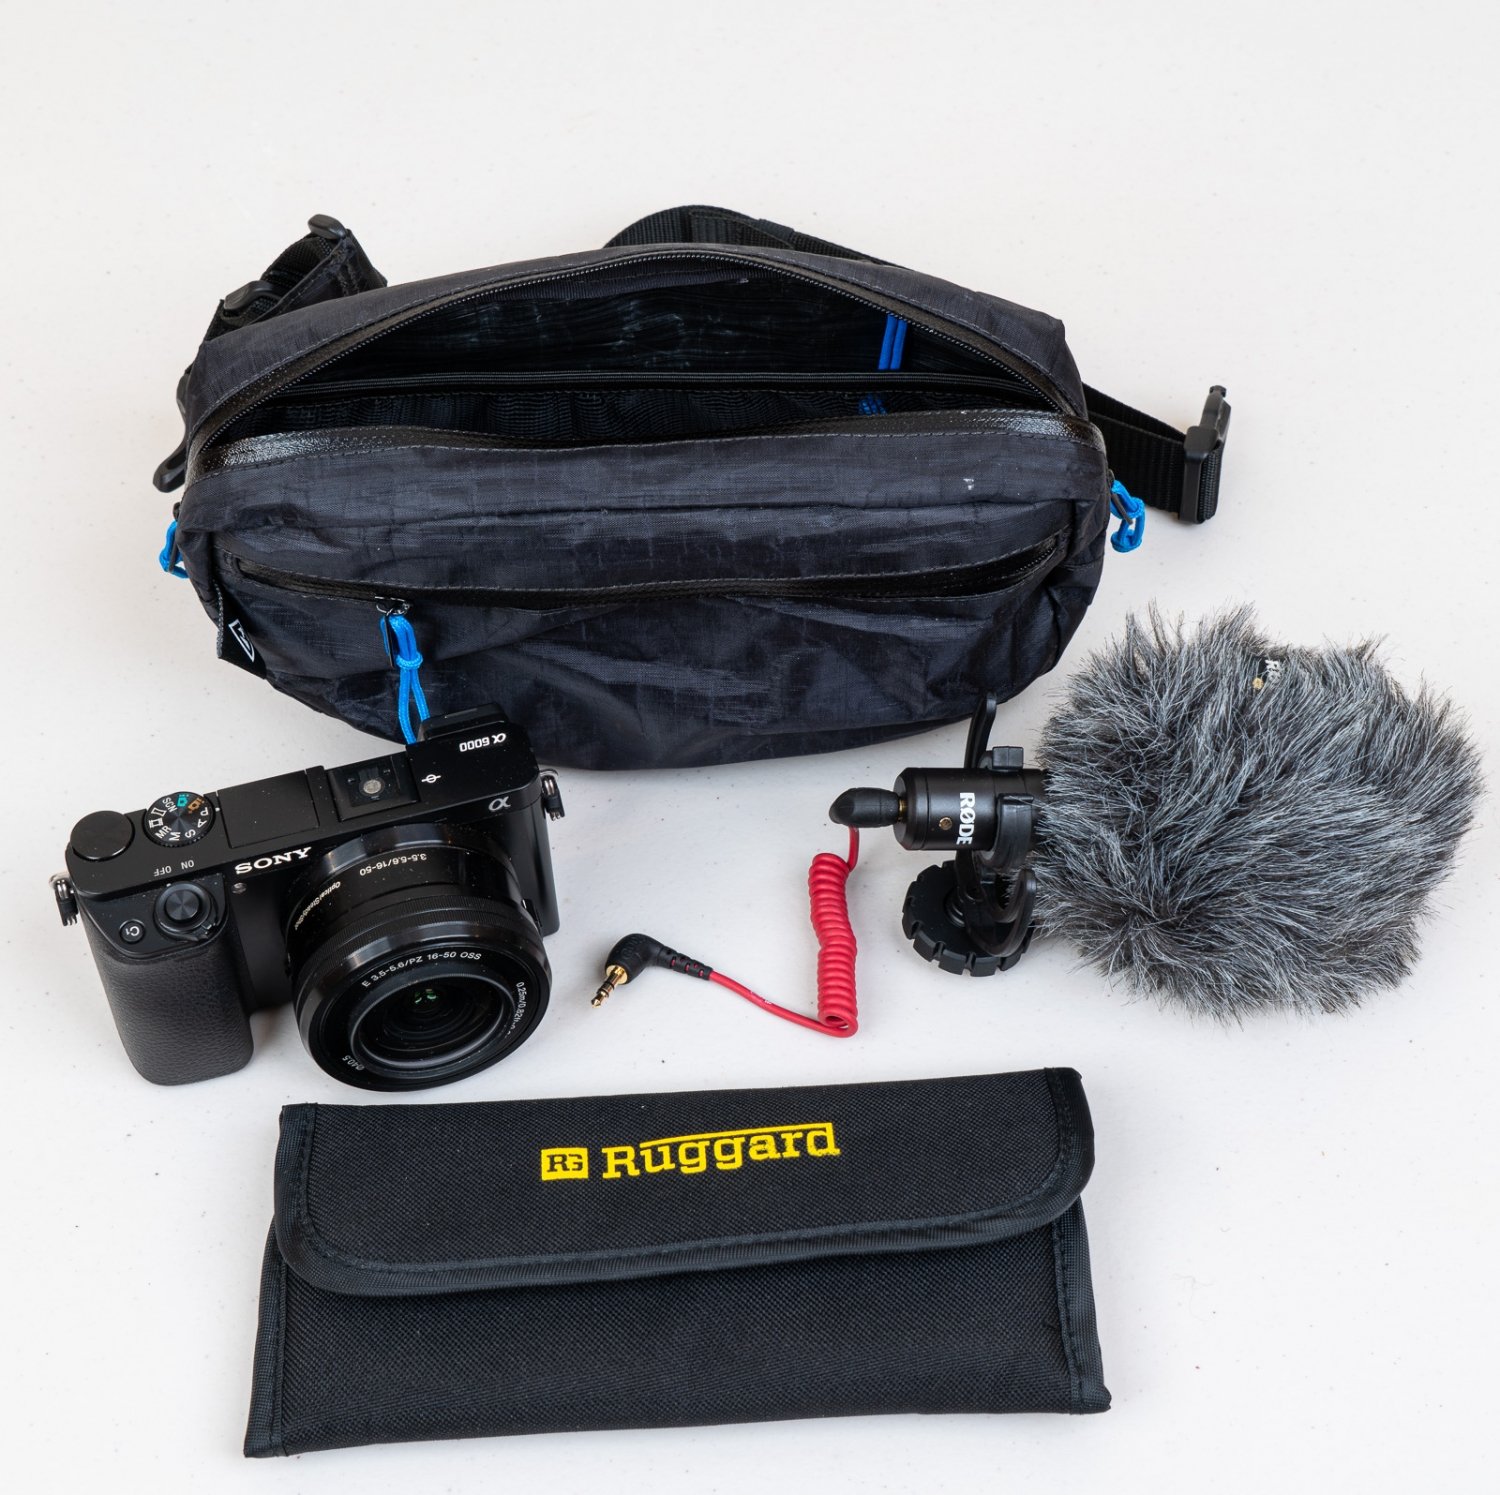 camera gear and waterproofing